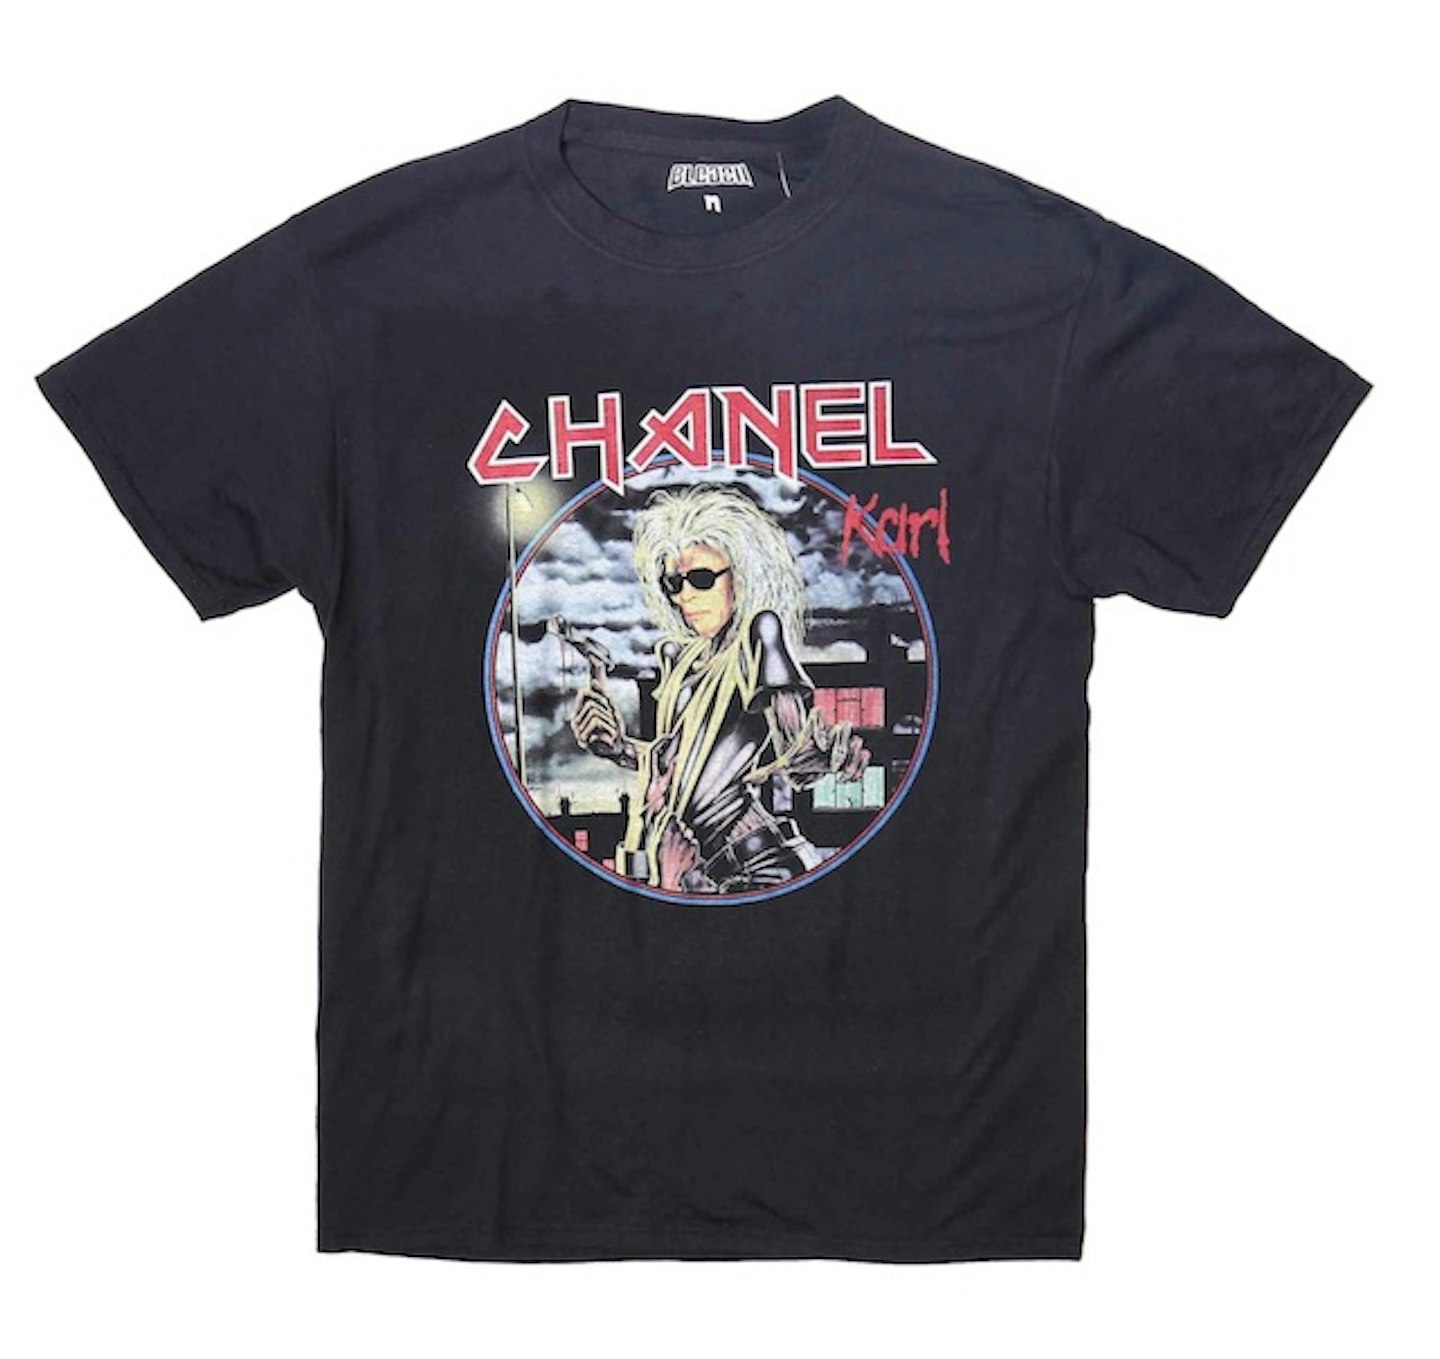 Chanel - Iron Lager t shirt